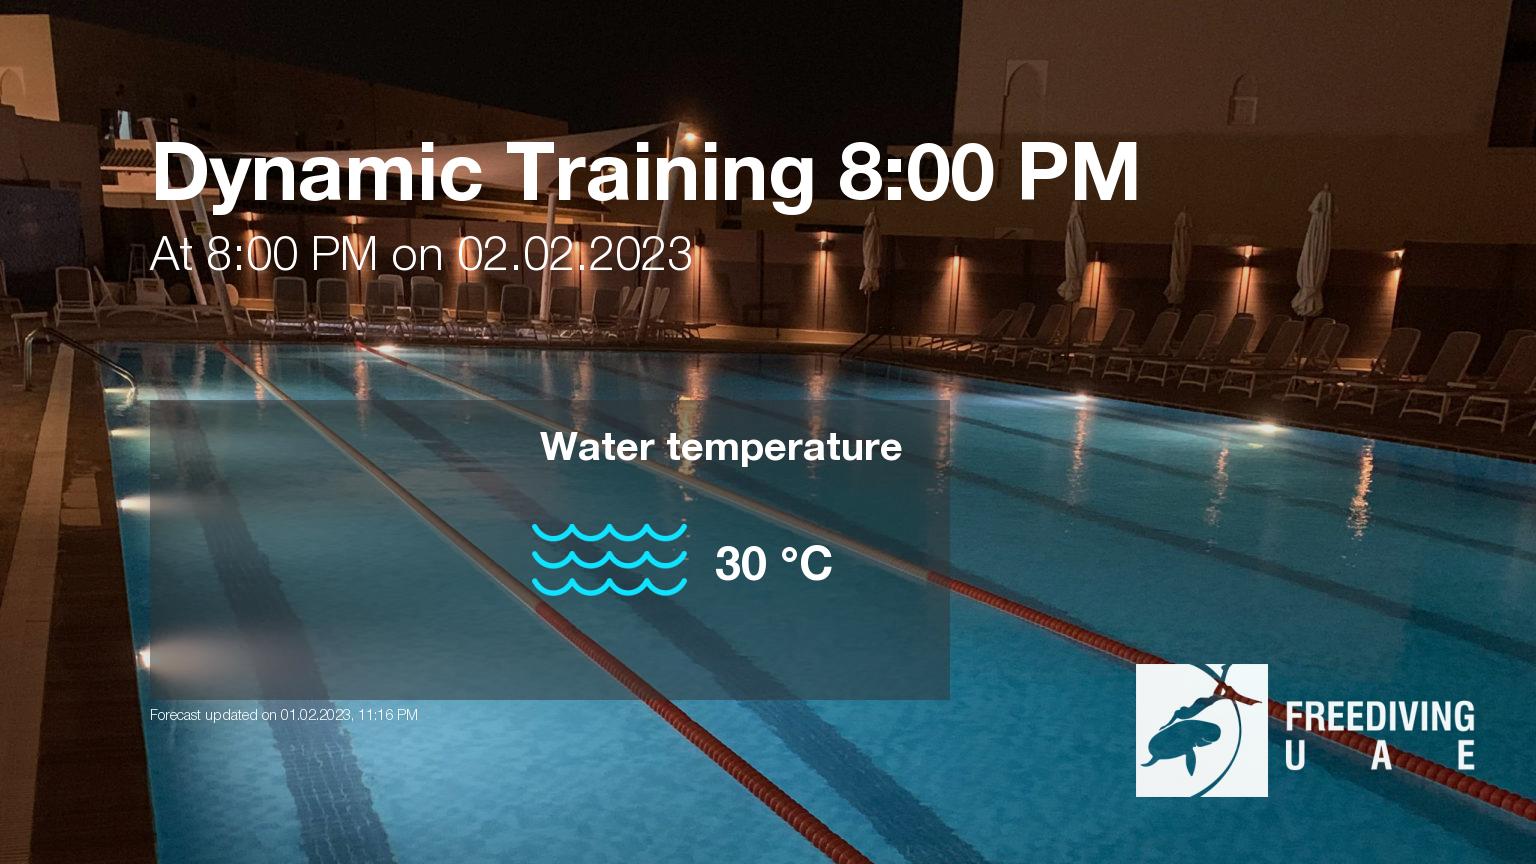 Expected weather during Dynamic Training 8:00 PM on Thu, Feb 2, at 8:00 PM